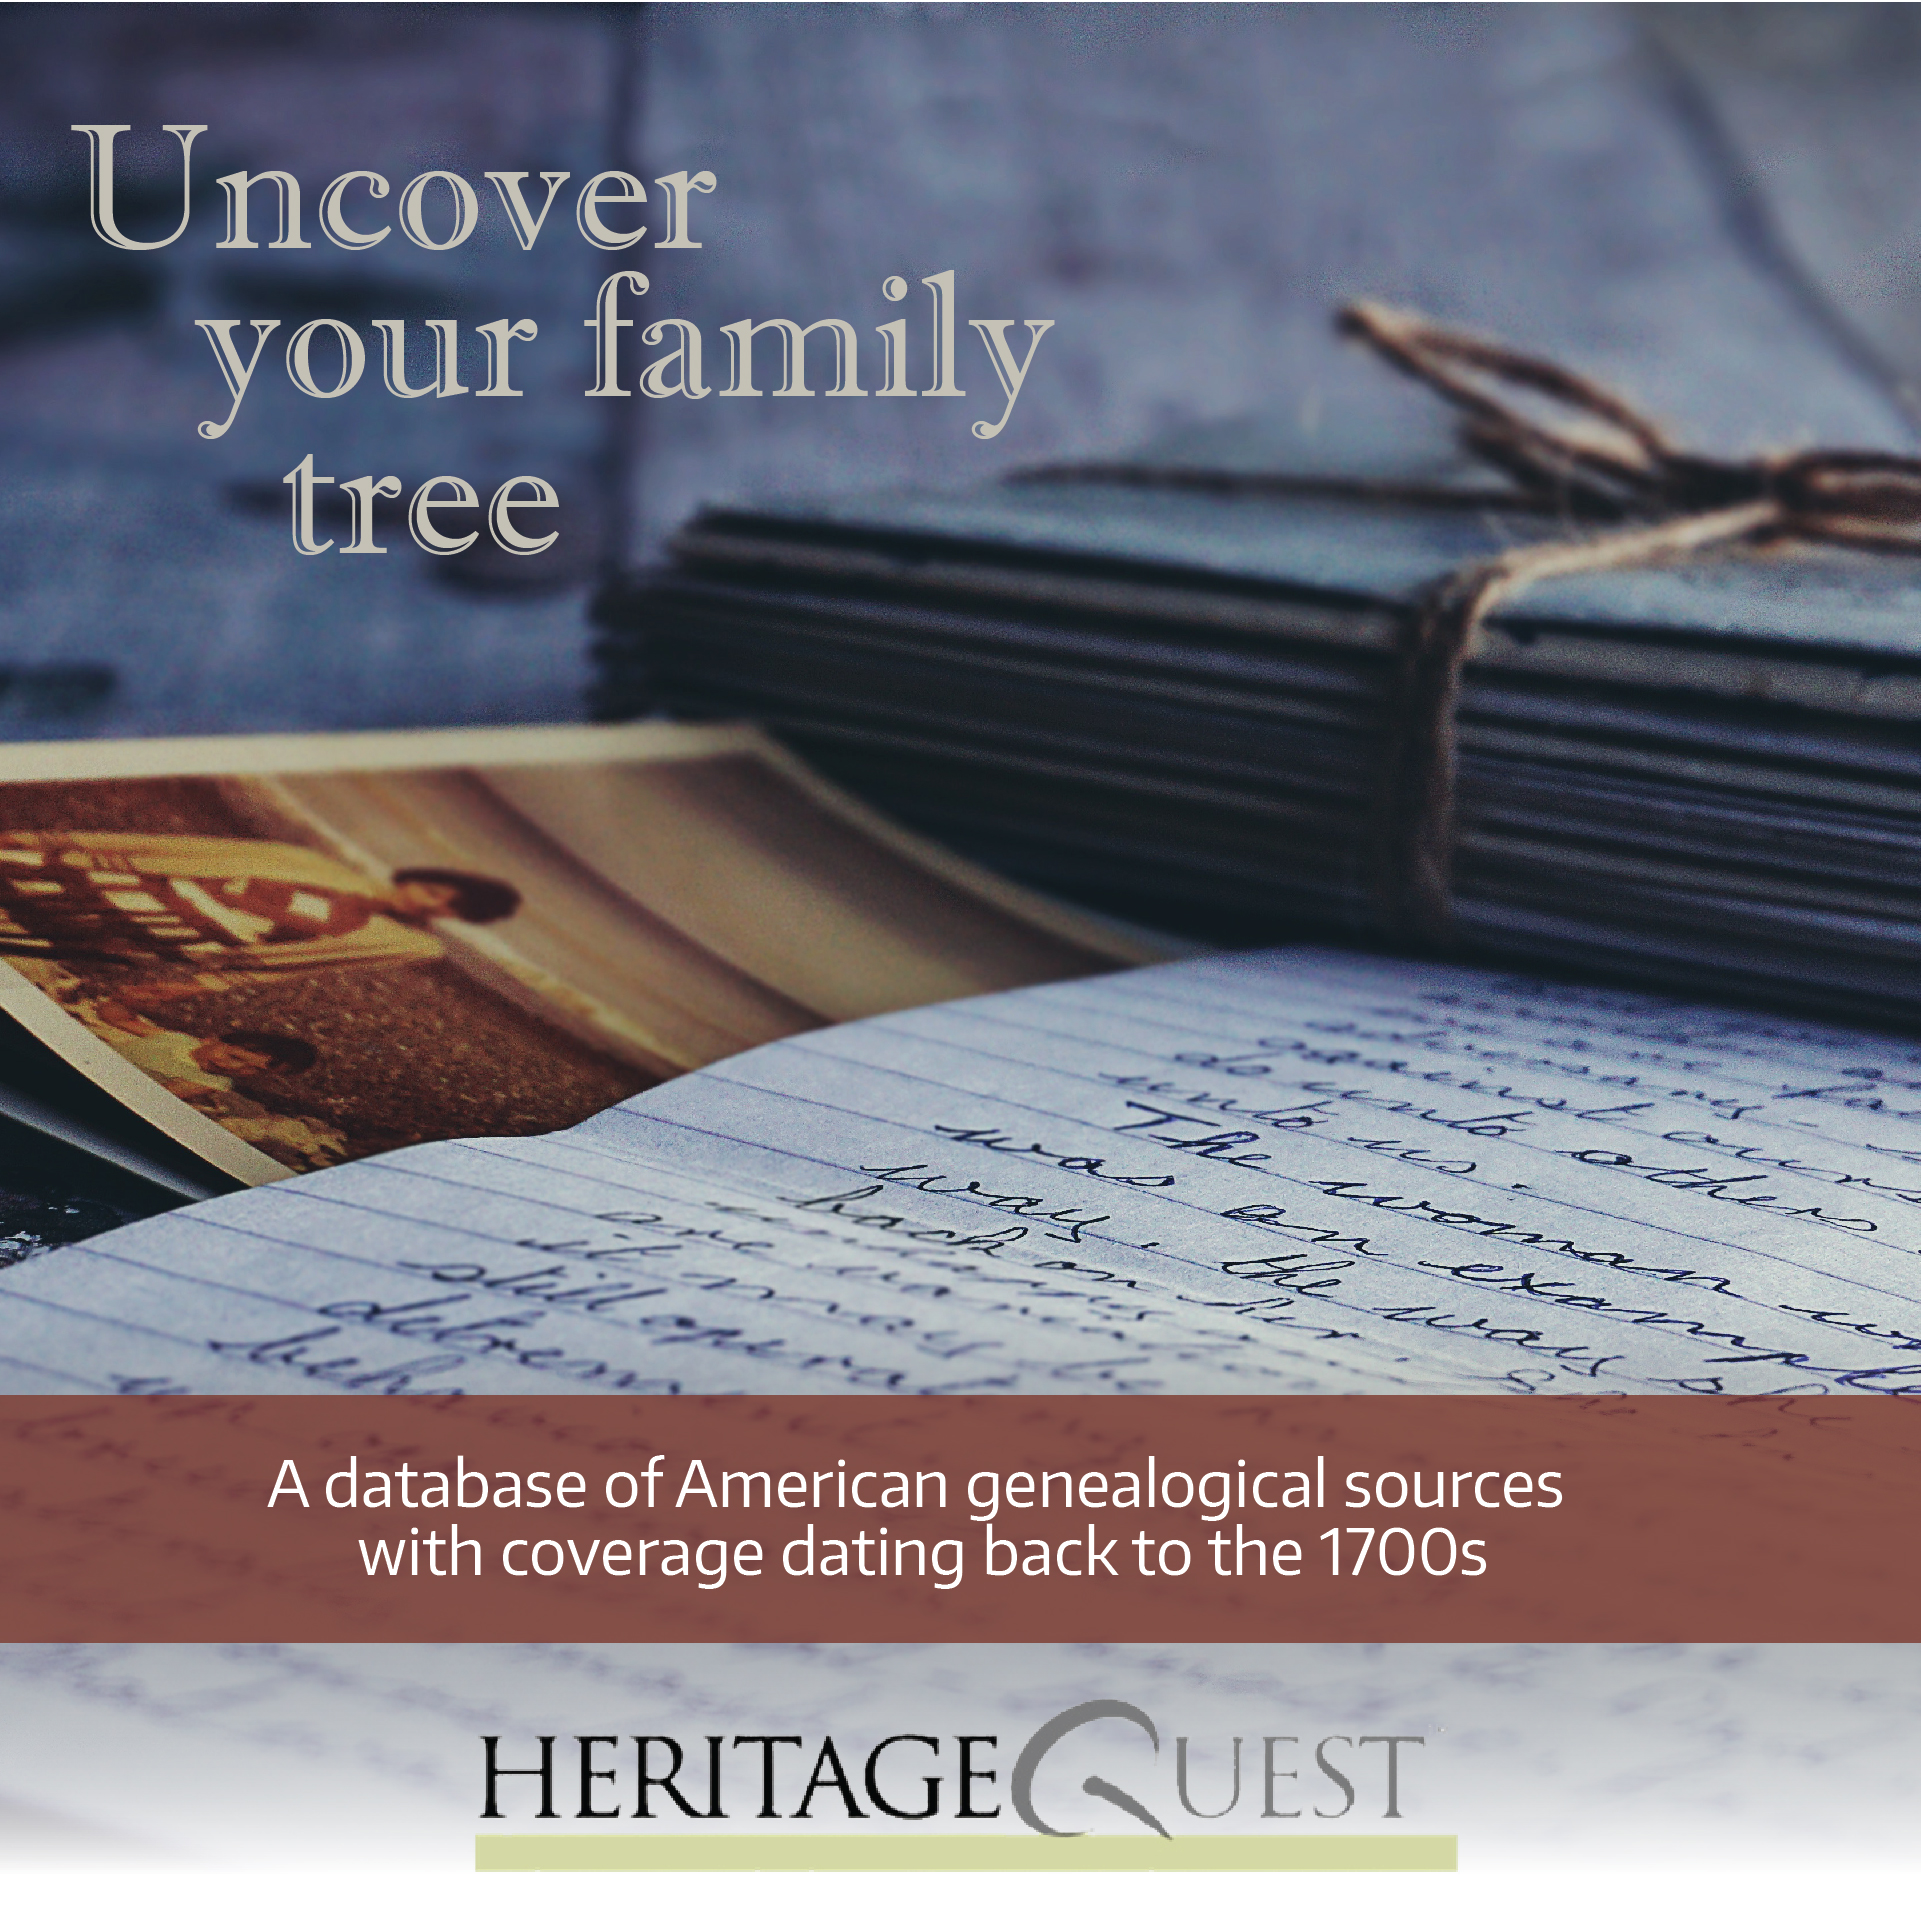 Uncover your family tree - A database of American genealogical sources with coverage dating back to the 1700s - HeritageQuest